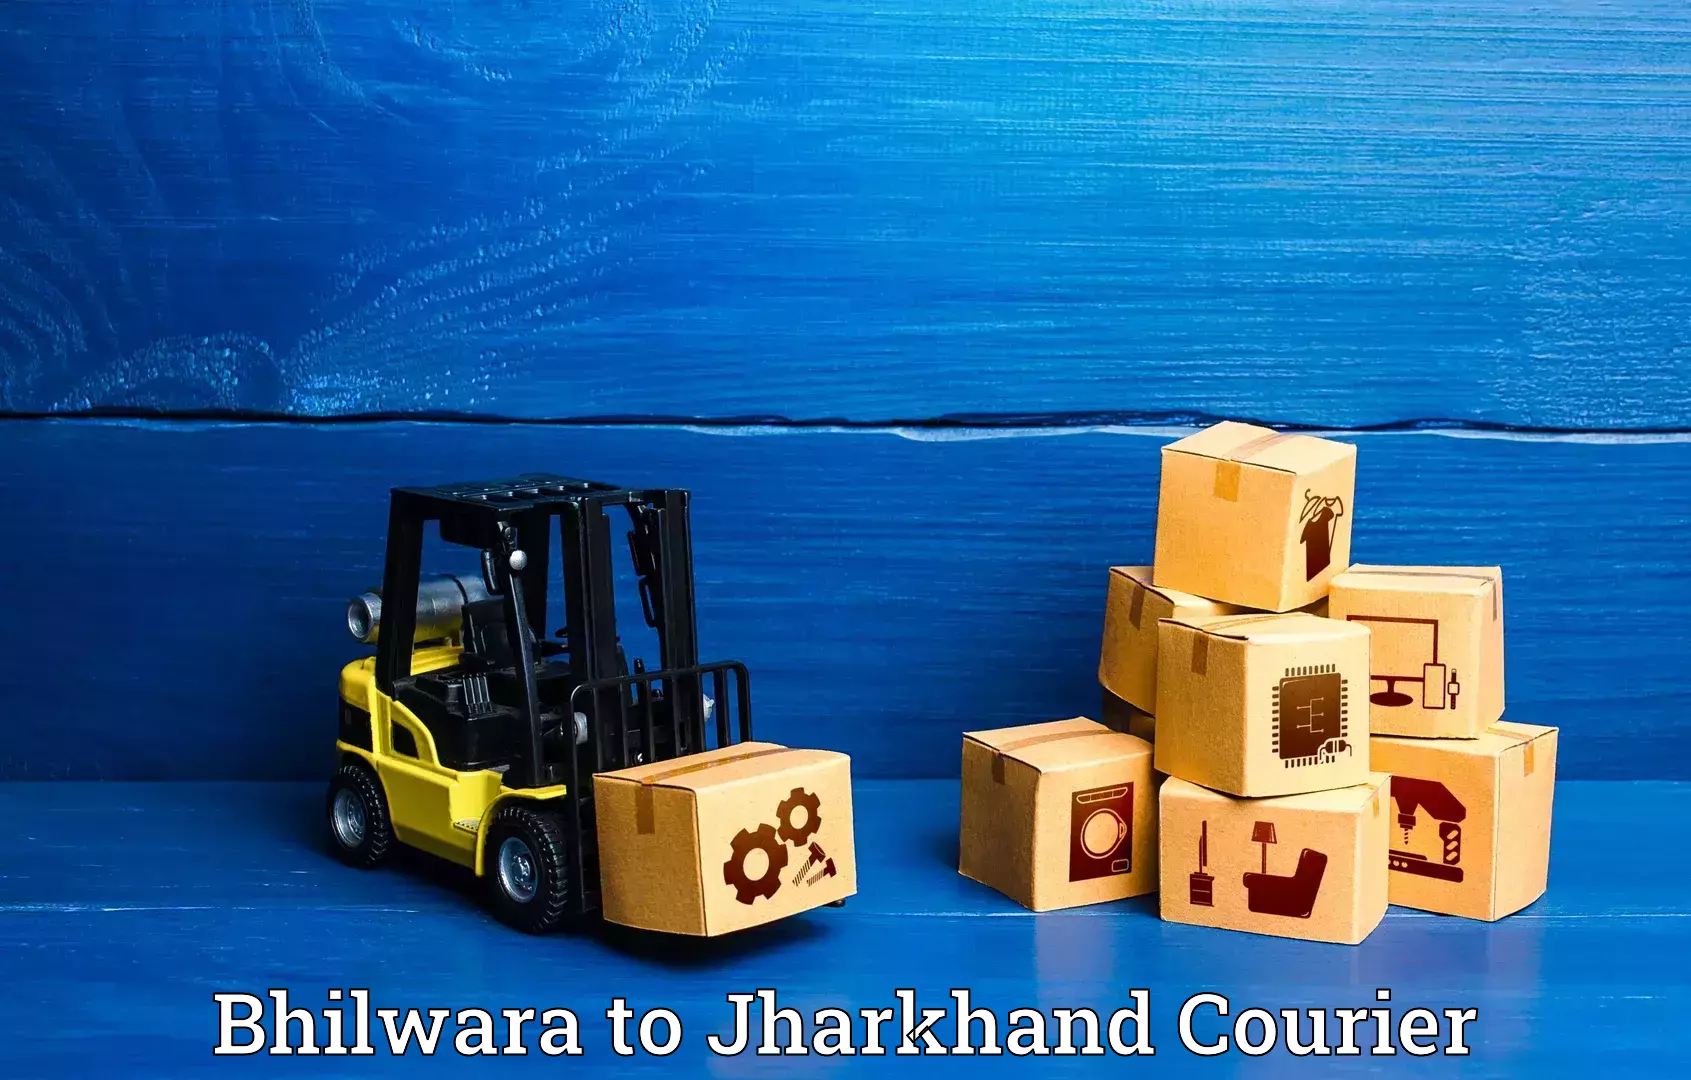 Baggage relocation service Bhilwara to Jharkhand